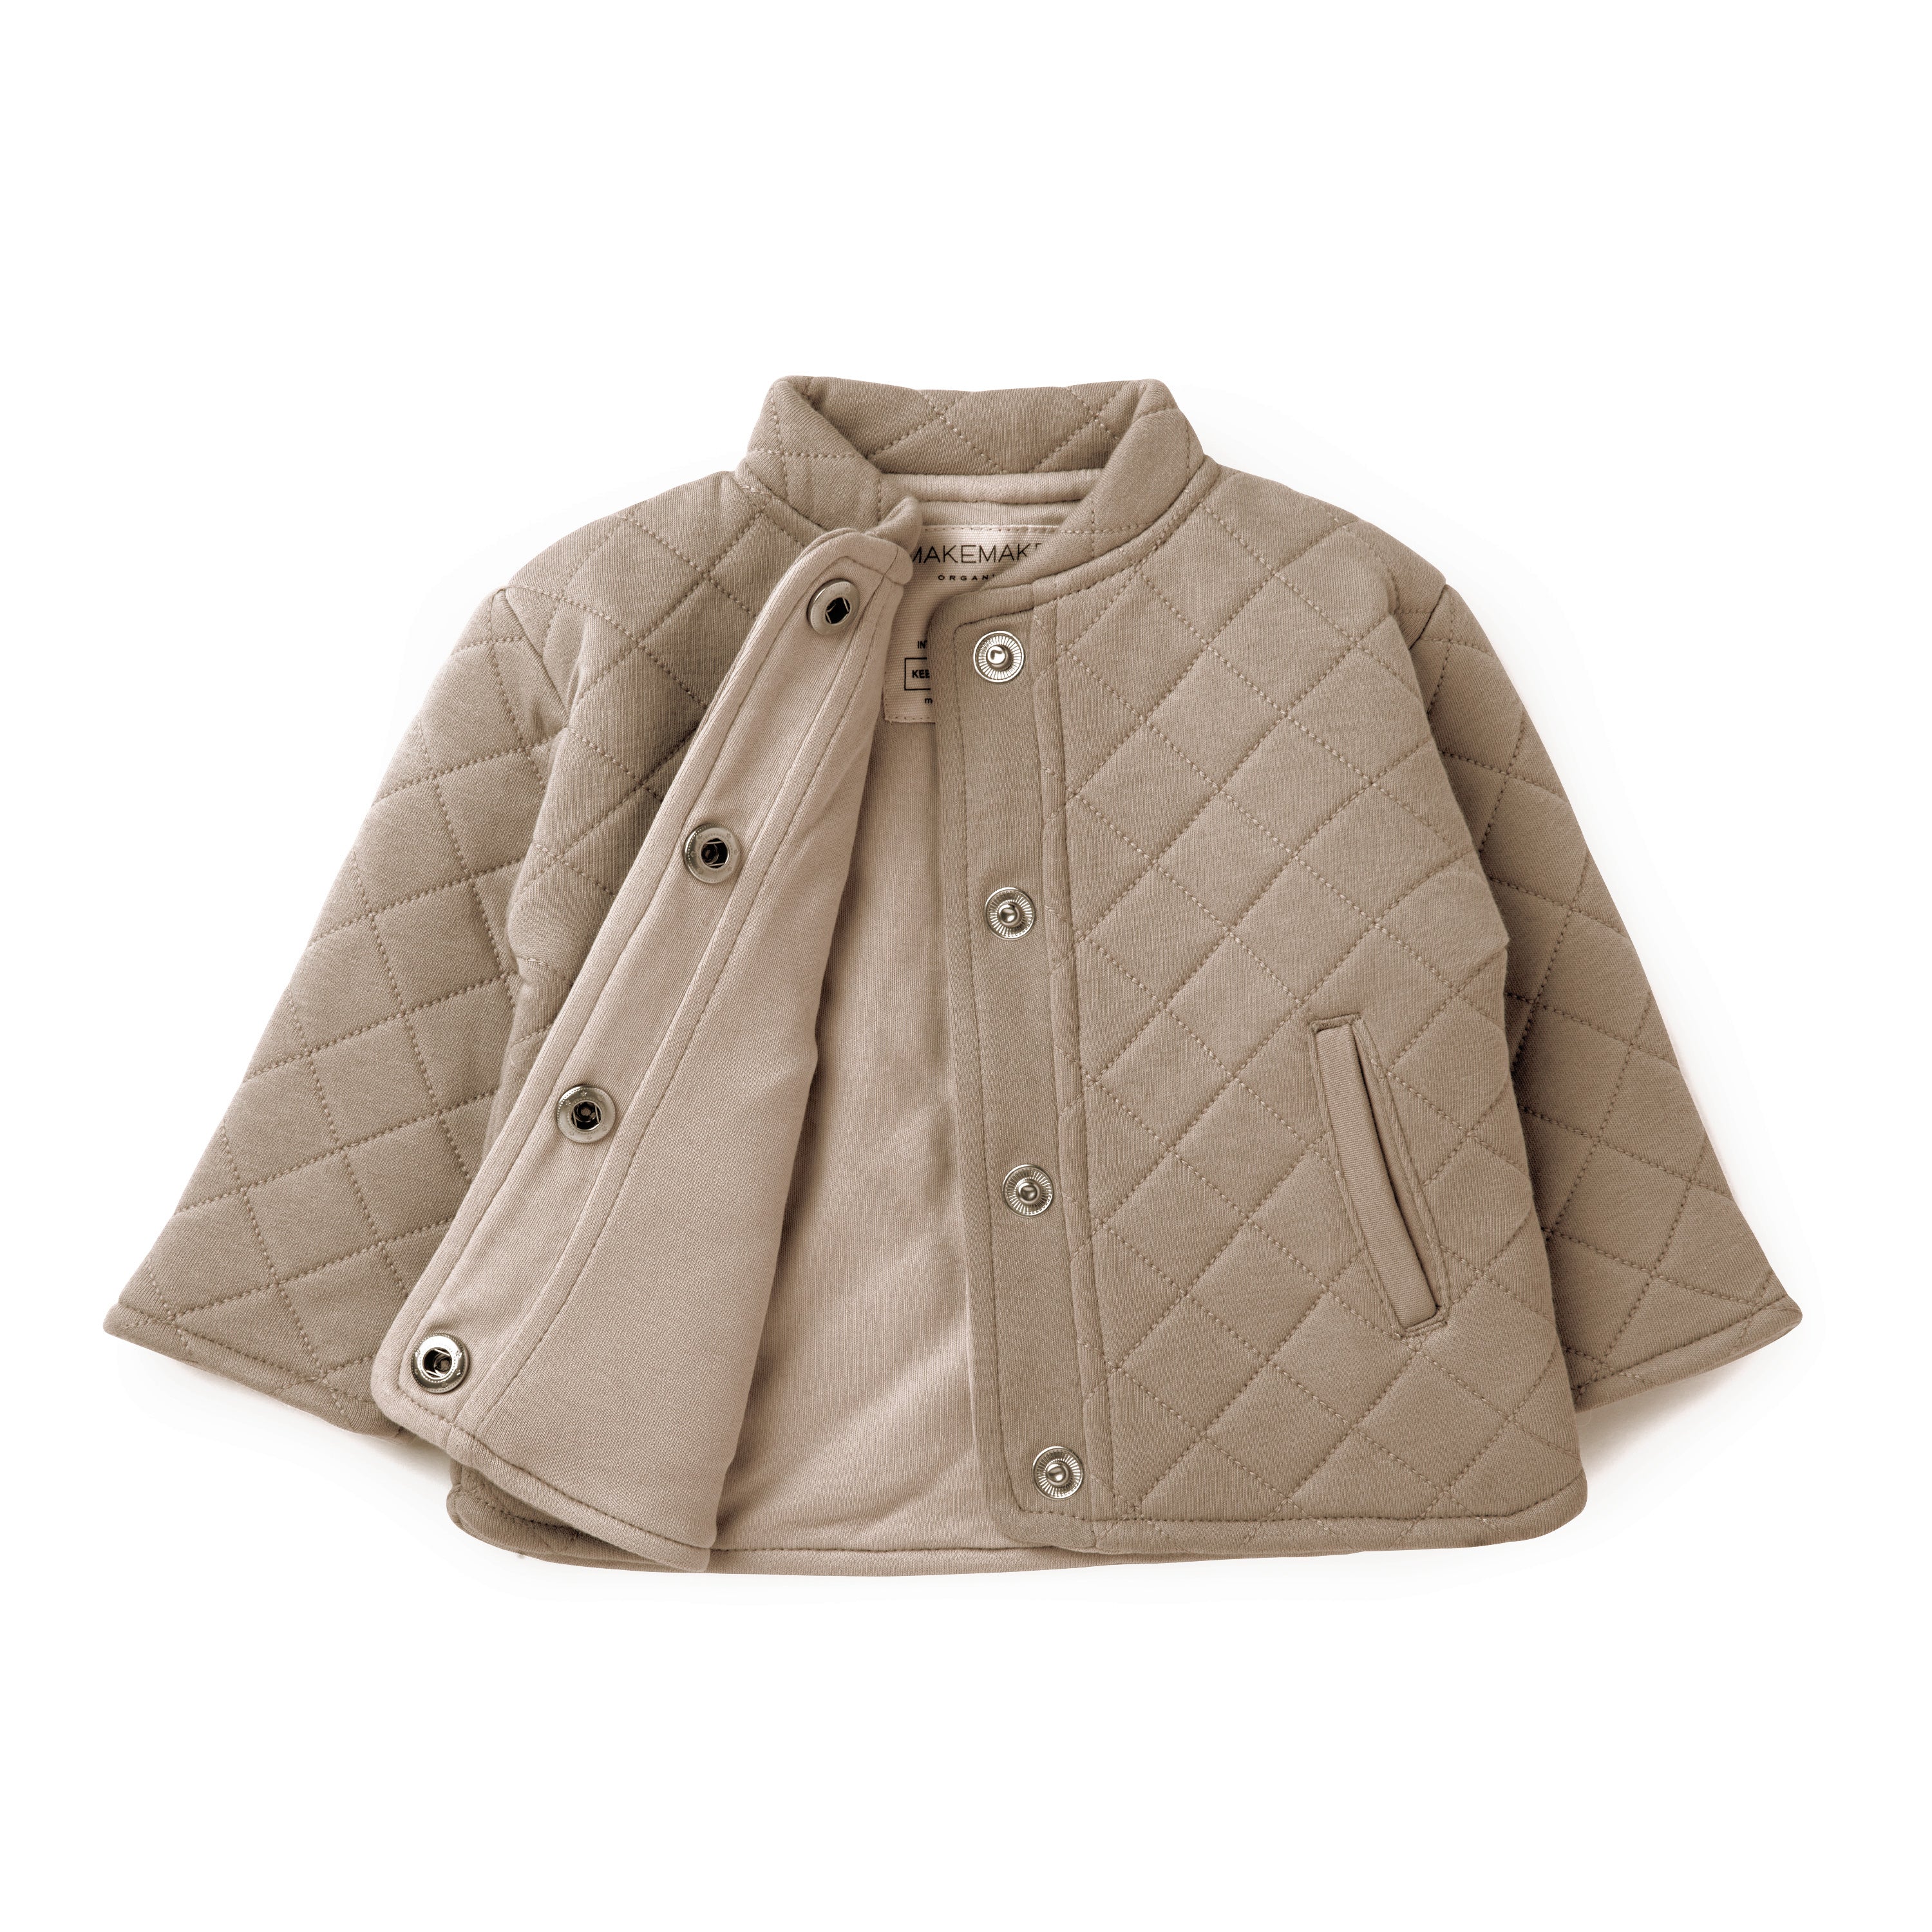 A mocha Organic Merino Wool Buttoned Jacket from Organic Kids with a stand-up collar, snap-button front, and a visible pocket, displayed against a white background.